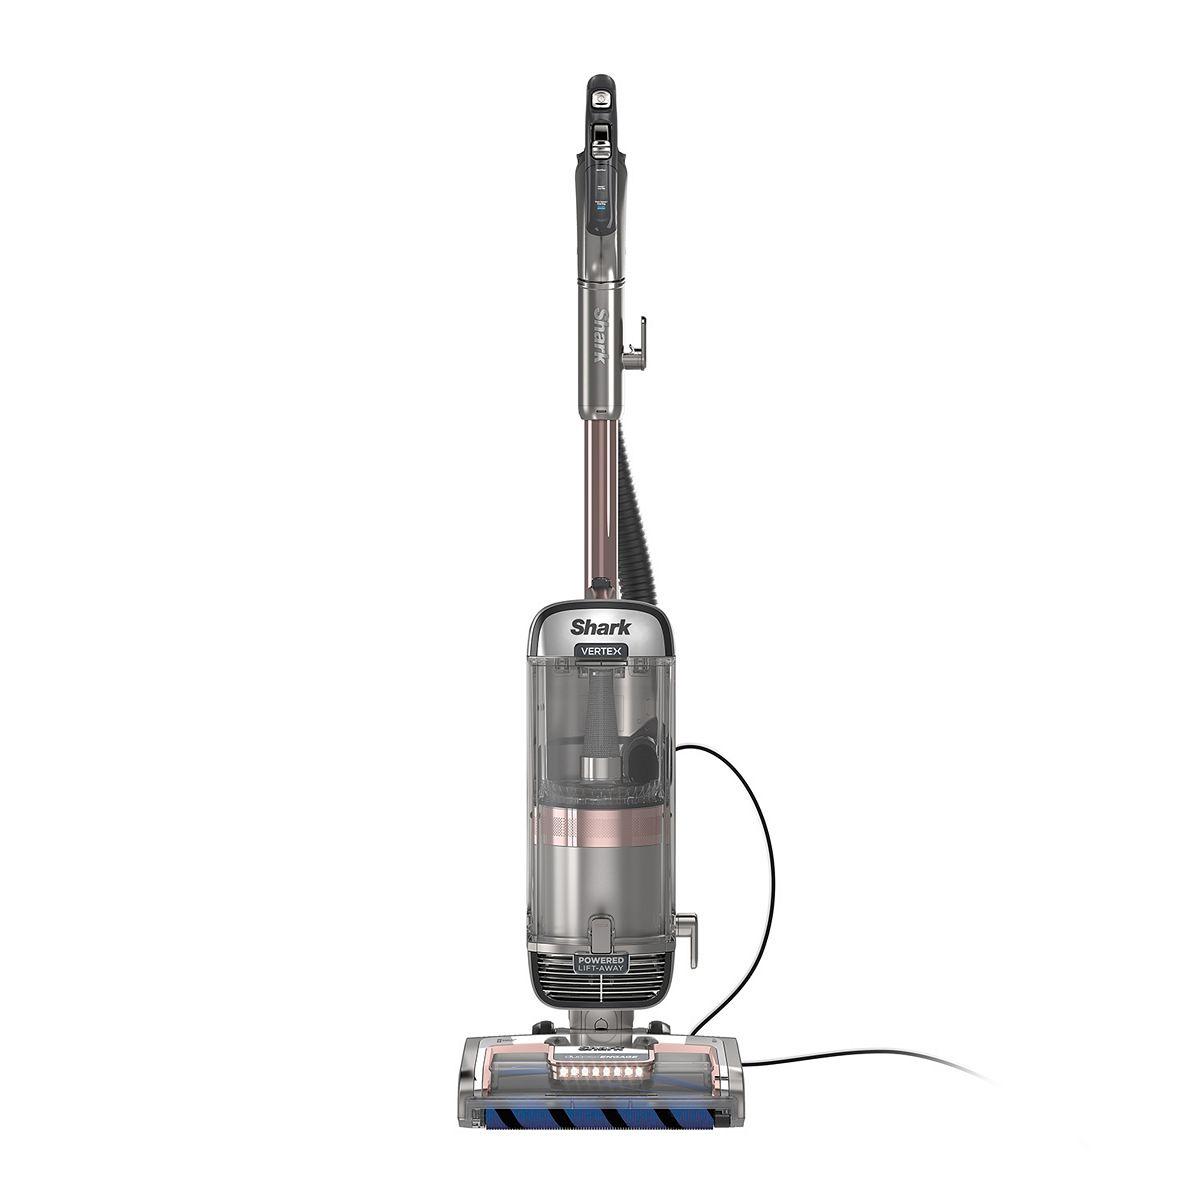 Shark Vertex DuoClean PowerFins Upright Vacuum for $212.49 Shipped